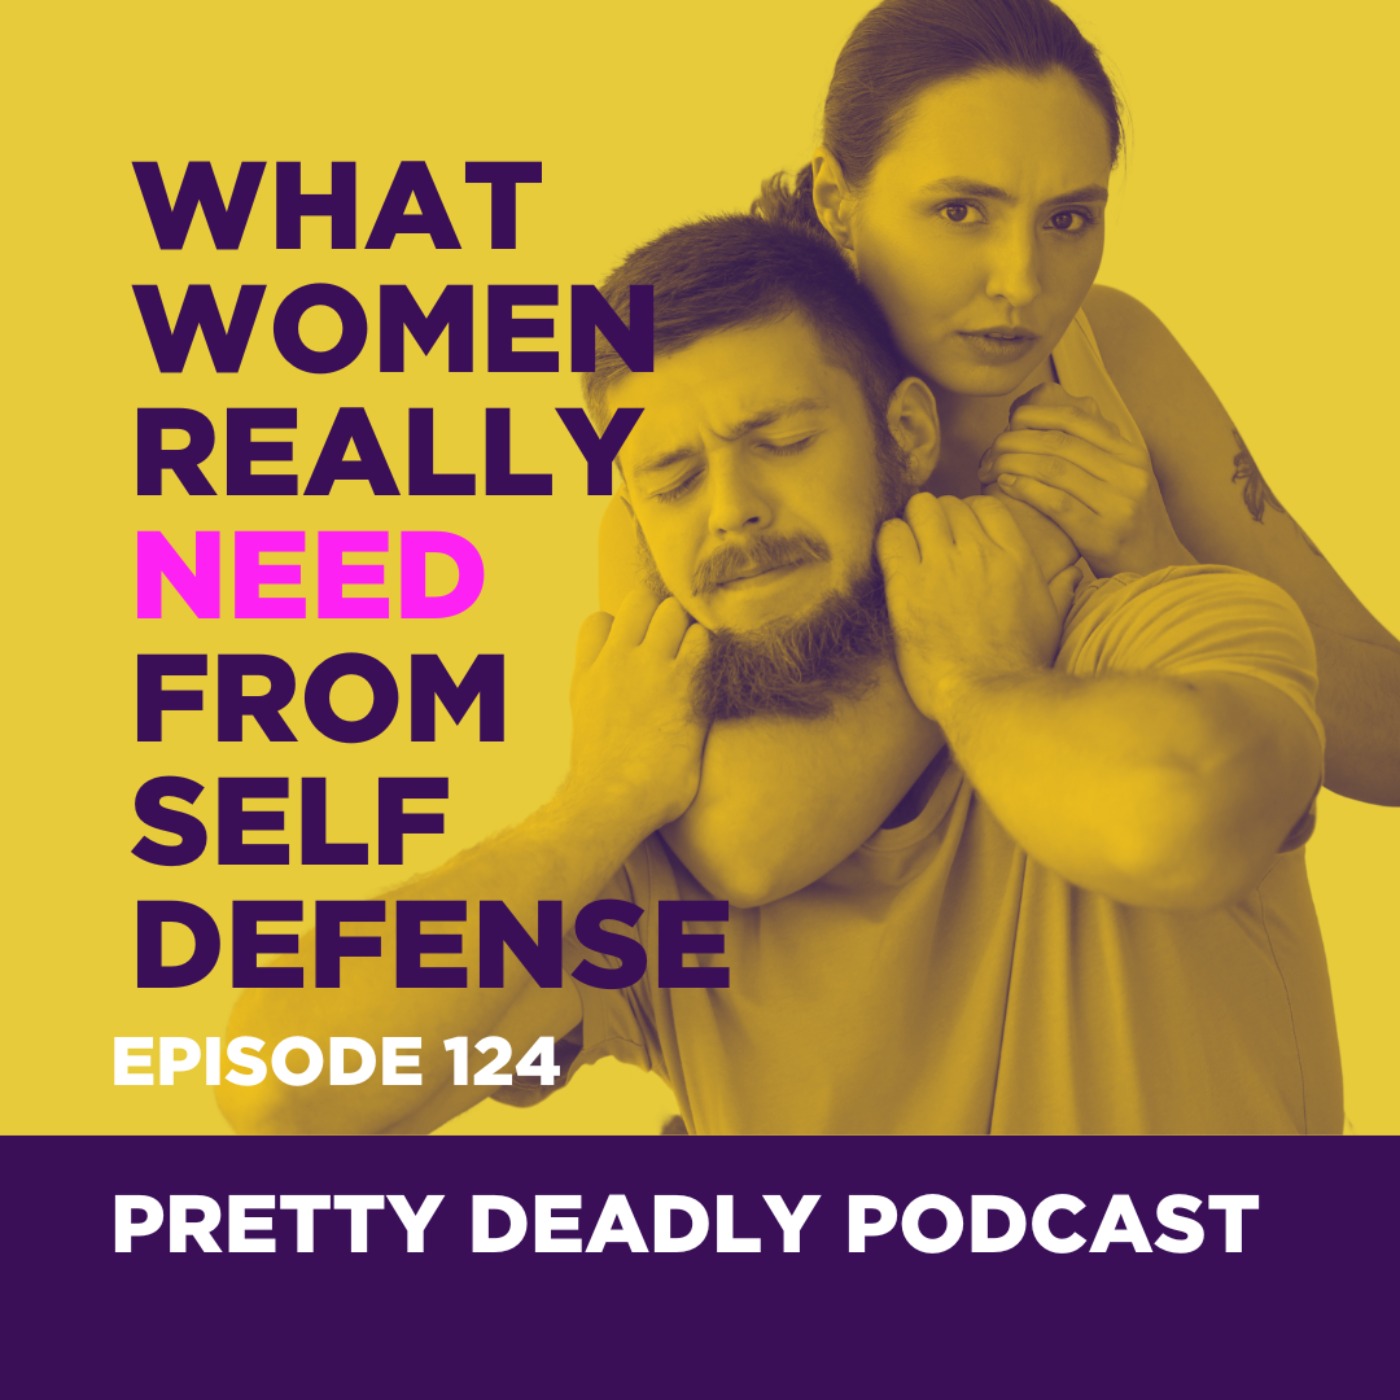 S8 Episode 124: What Women Really Need from Self Defense | Pretty Deadly Podcast